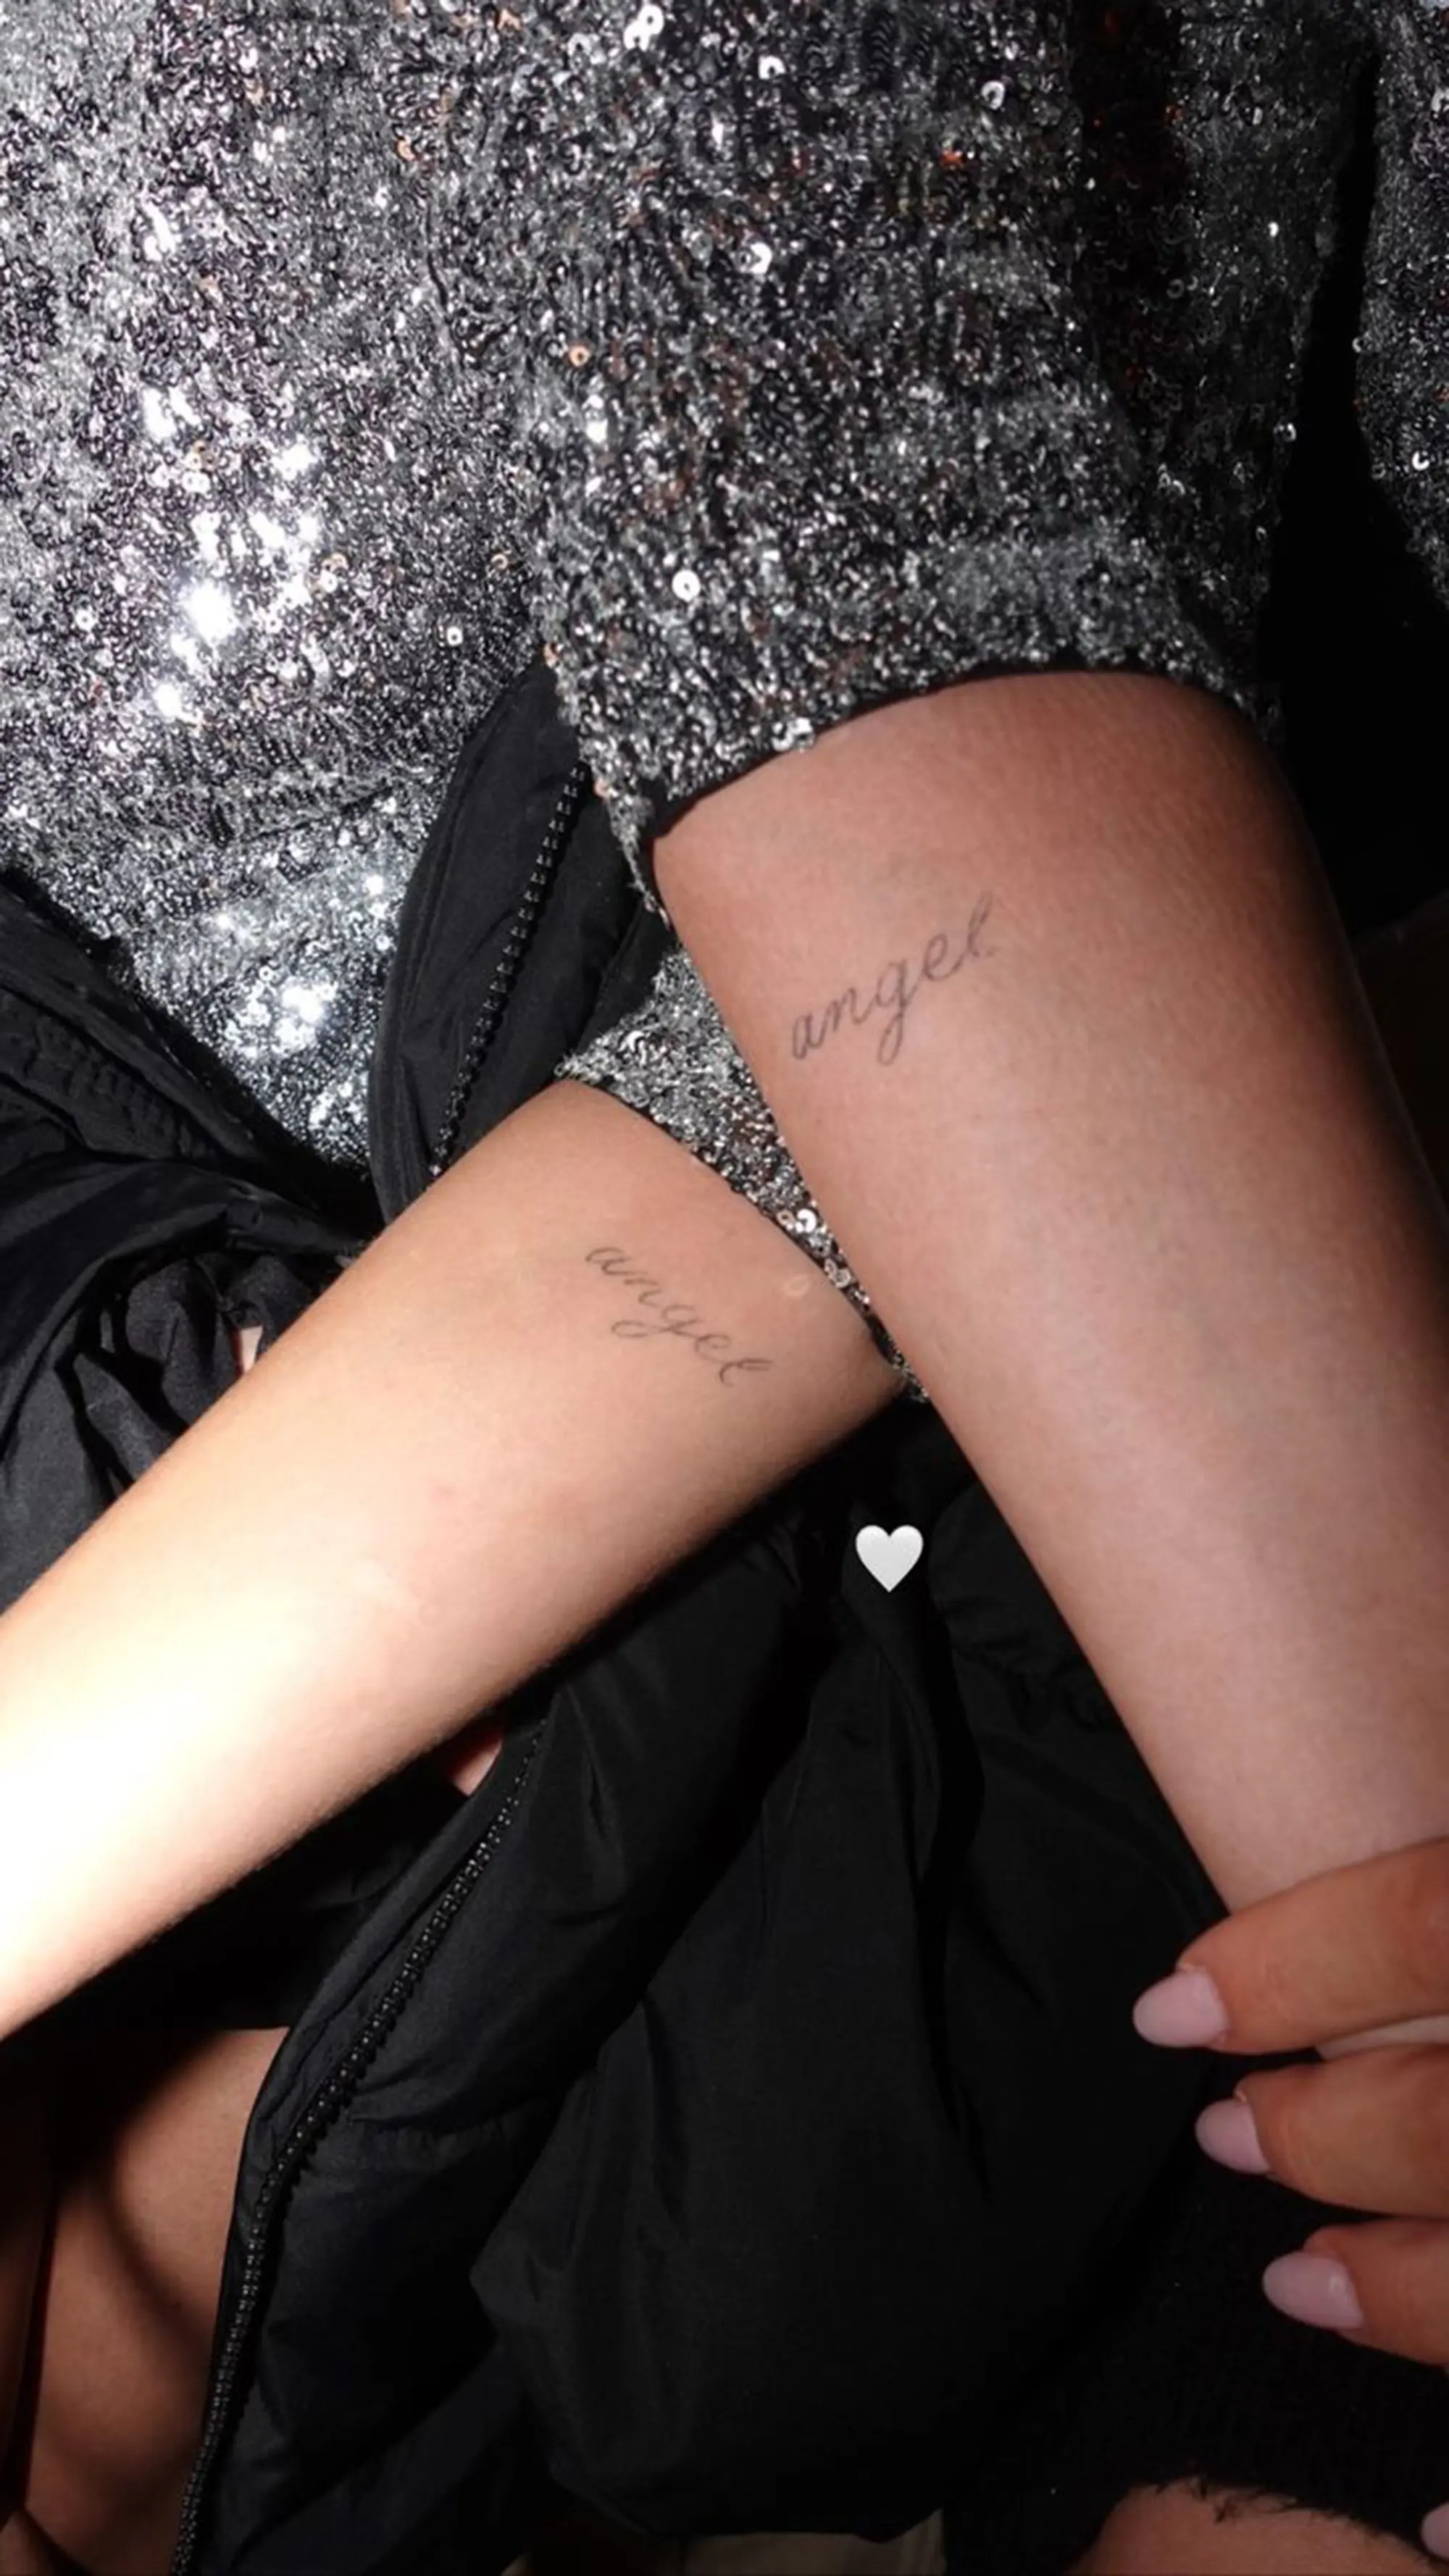 Selena Gomezs 17 Known Tattoos a Complete Guide to Her Ink